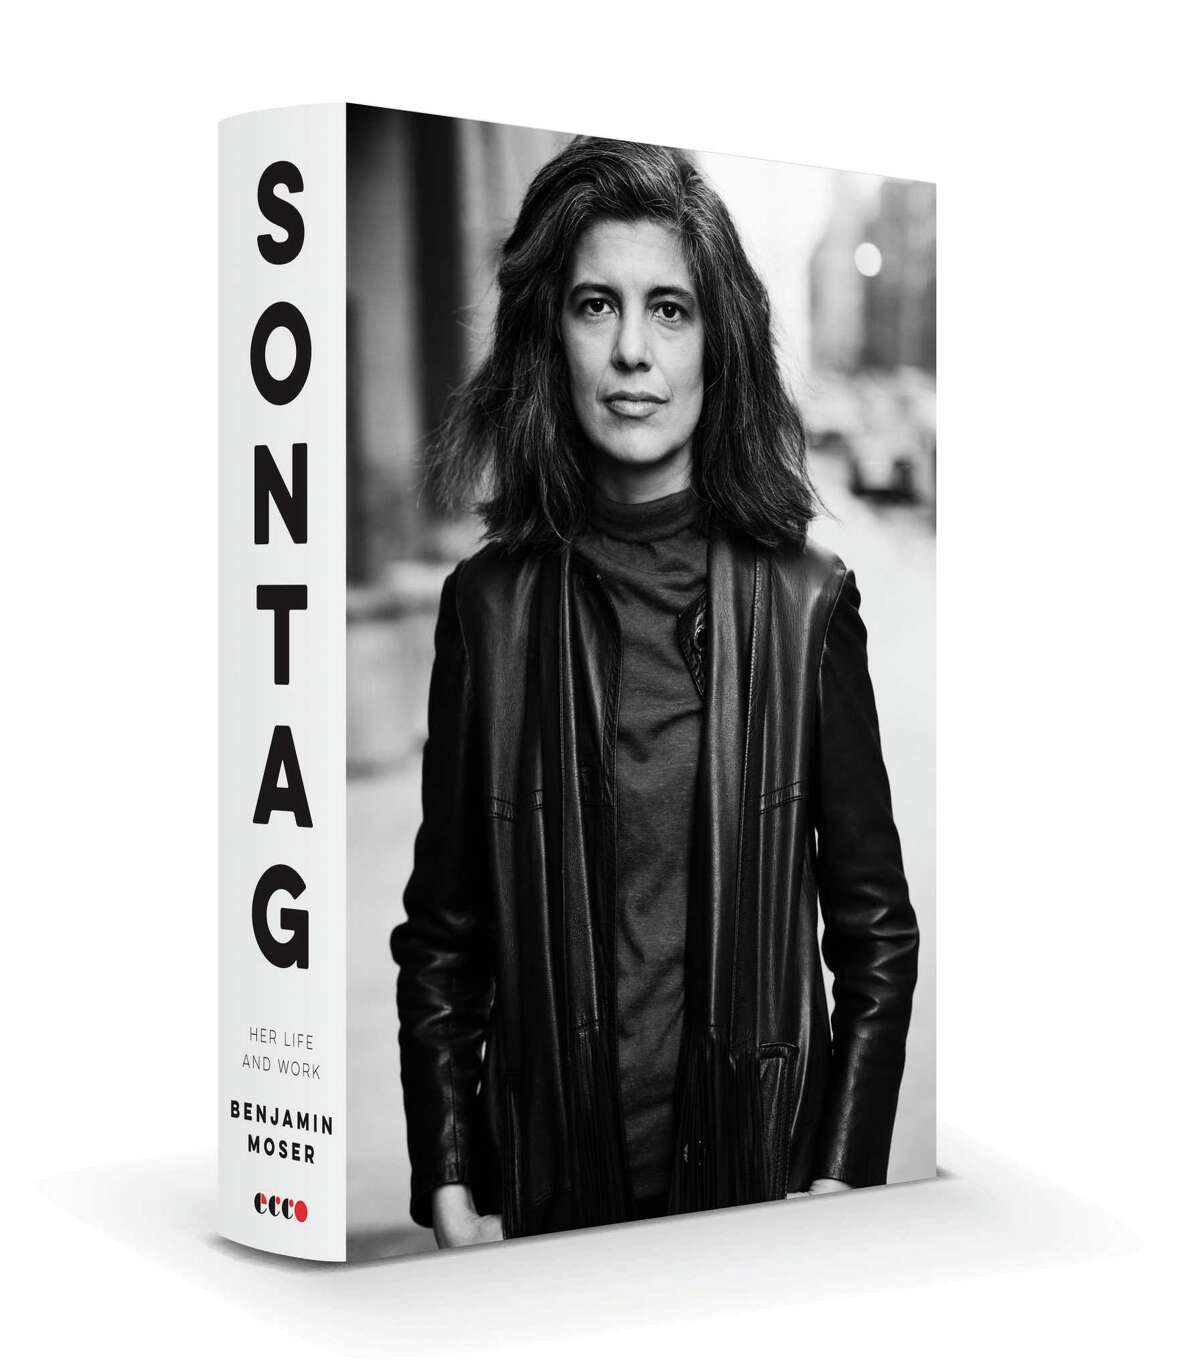 cover image for "Sontag: Her Life and Work," a biography of Susan Sontag by Benjamin Moser, a Houston native.